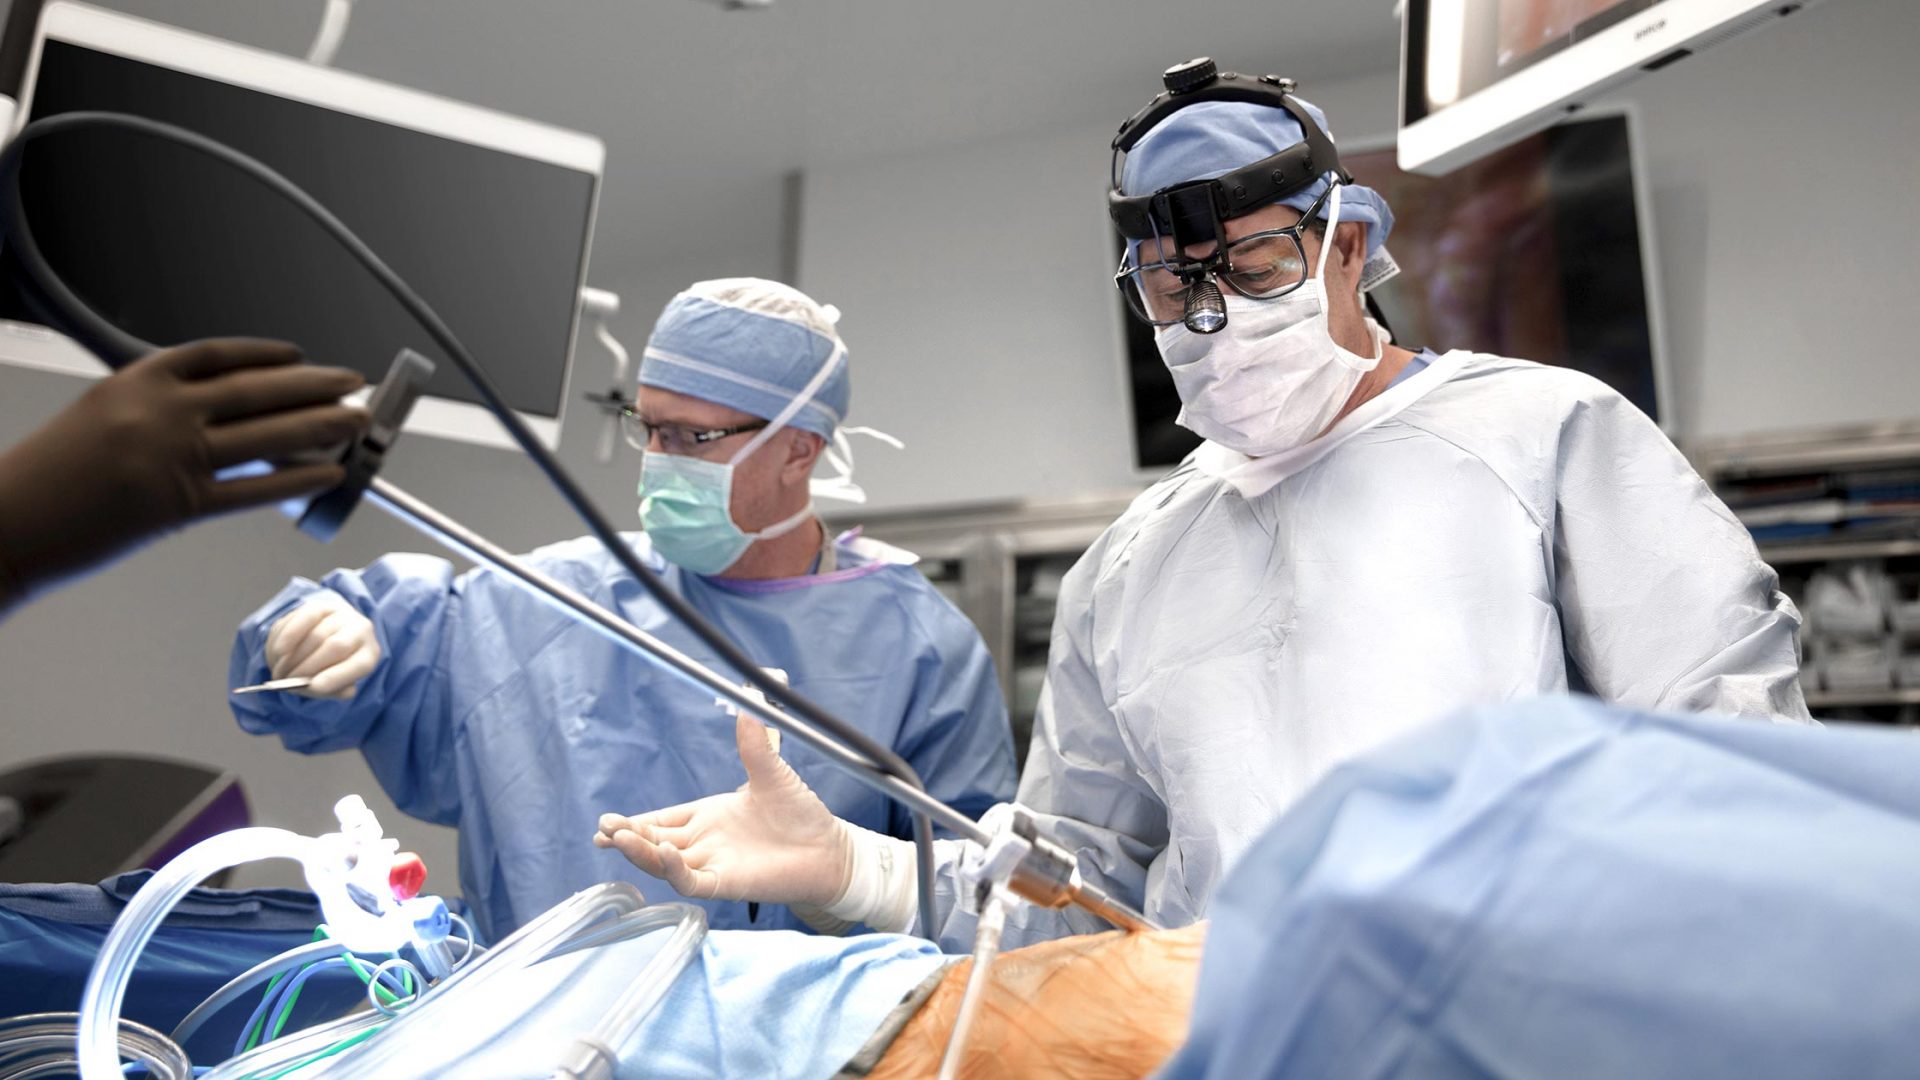 Dr. Robert J. Cerfolio, and Team Performing Robotic Thoracic Procedure in Operating Room